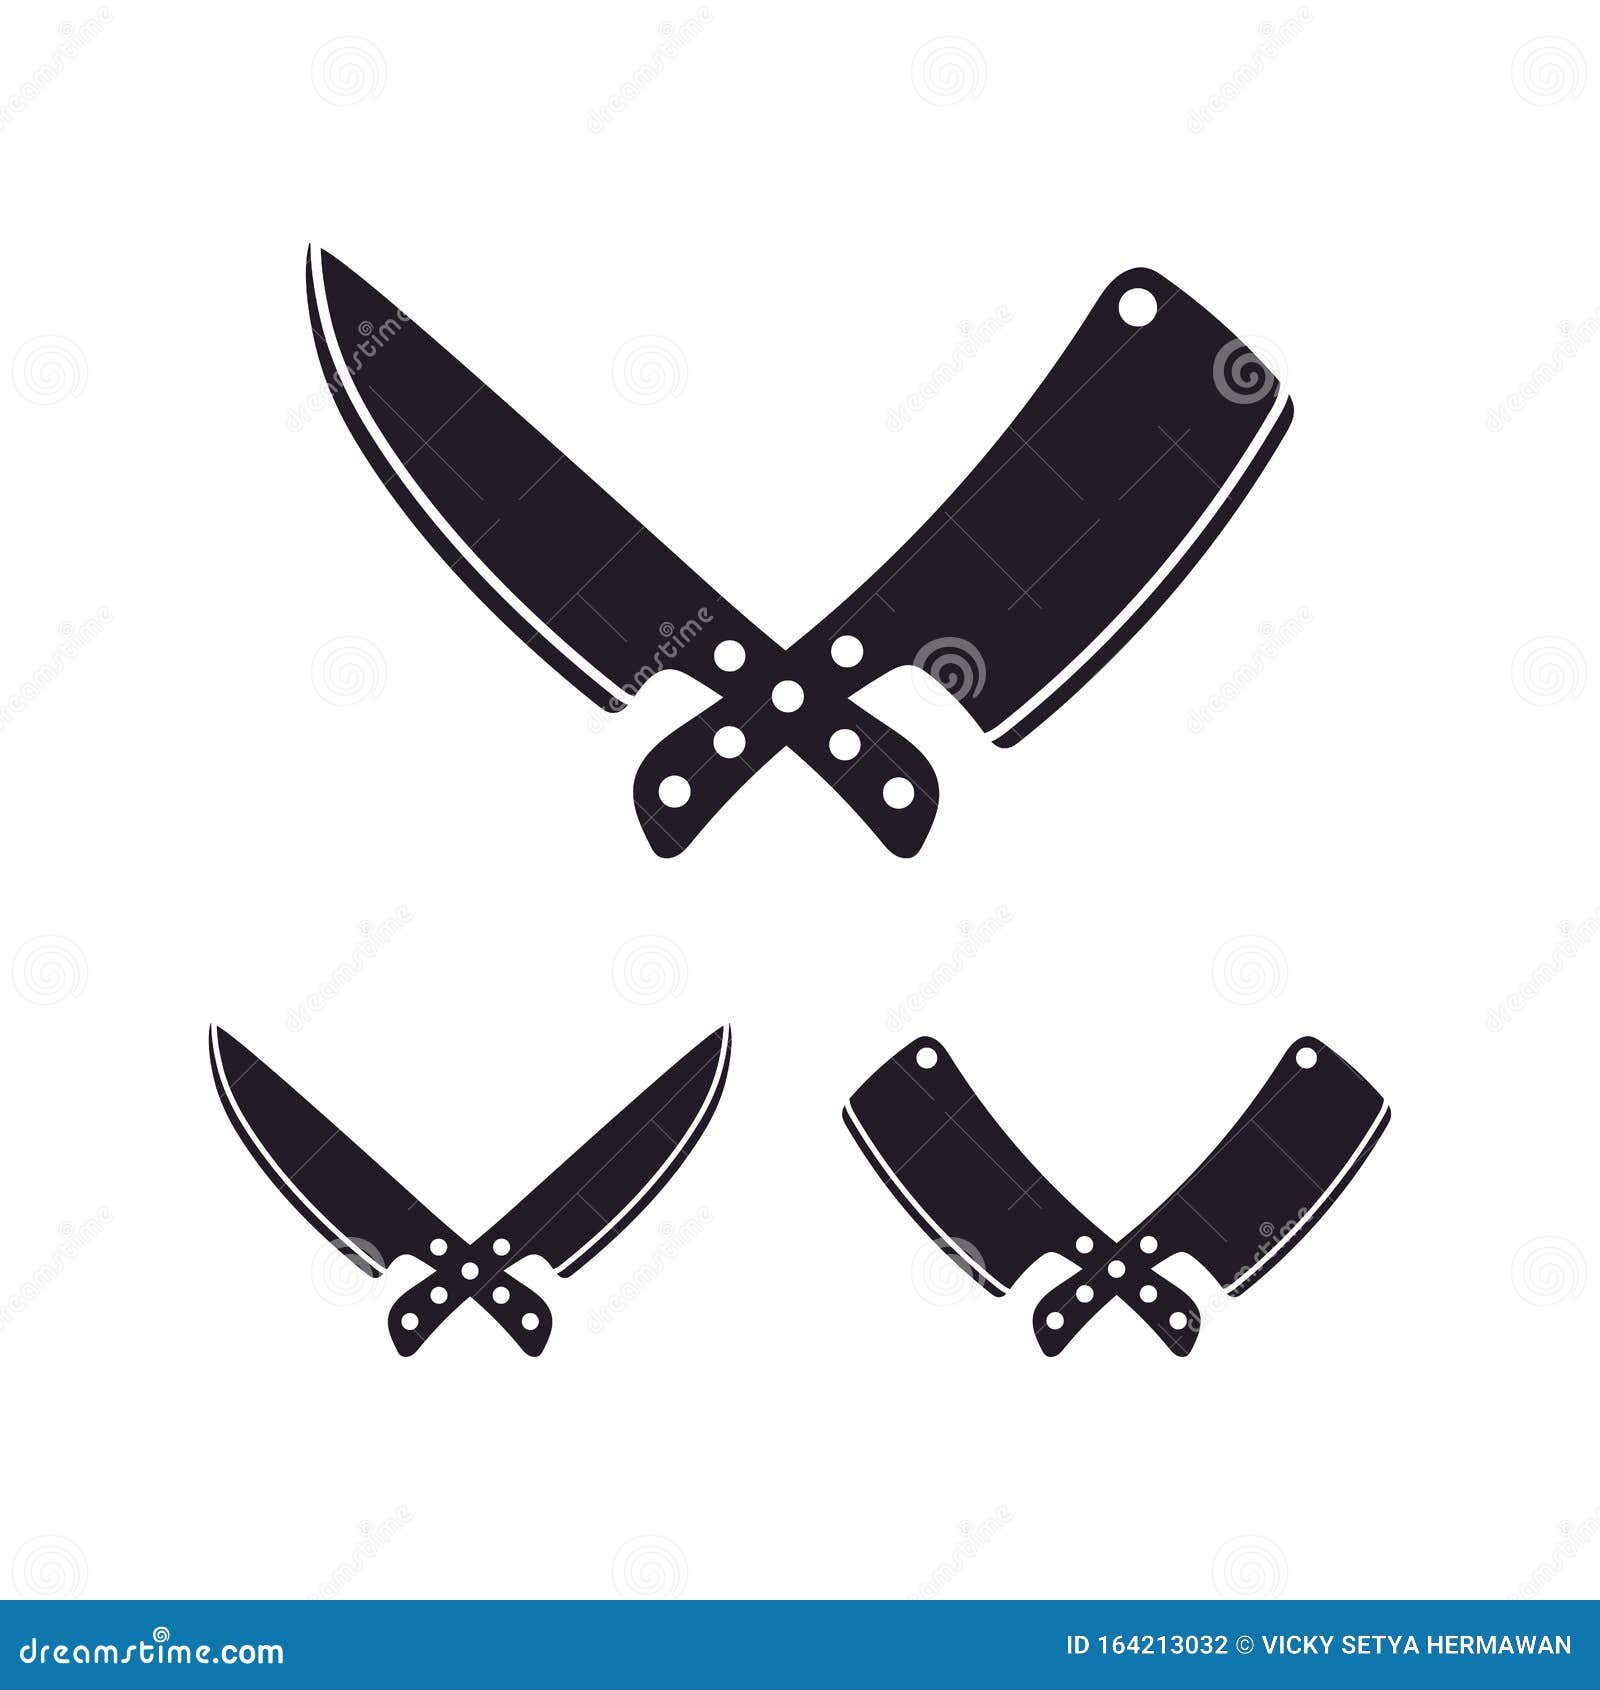 Knife And Cleaver Cross Sign For Butcher / Meat Logo Design Stock